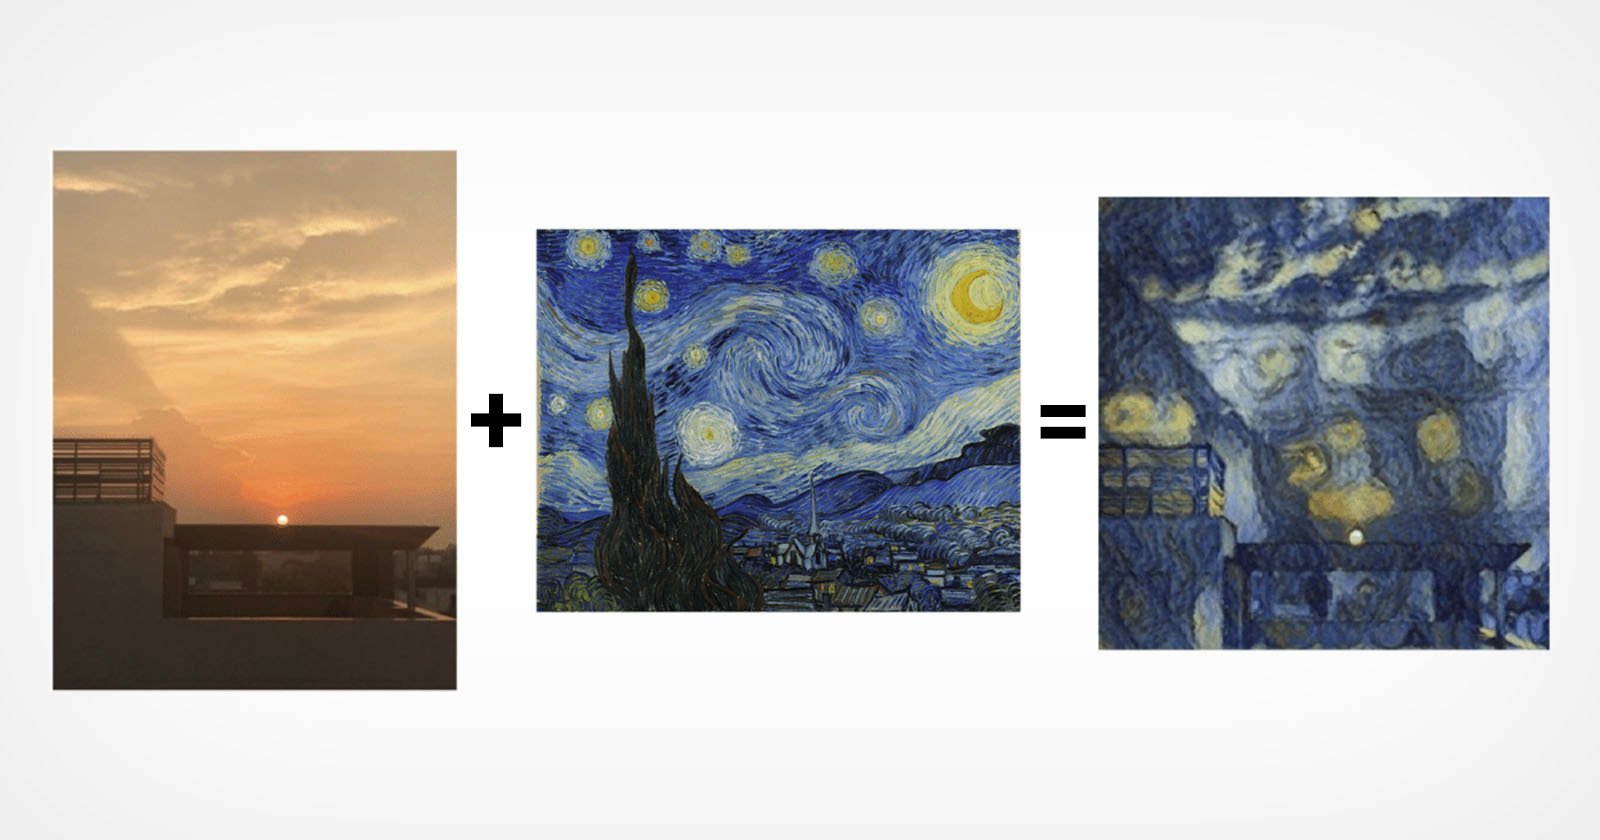 US Copyright Office Rejects AI Image That Blends Real Photo and Van Gogh